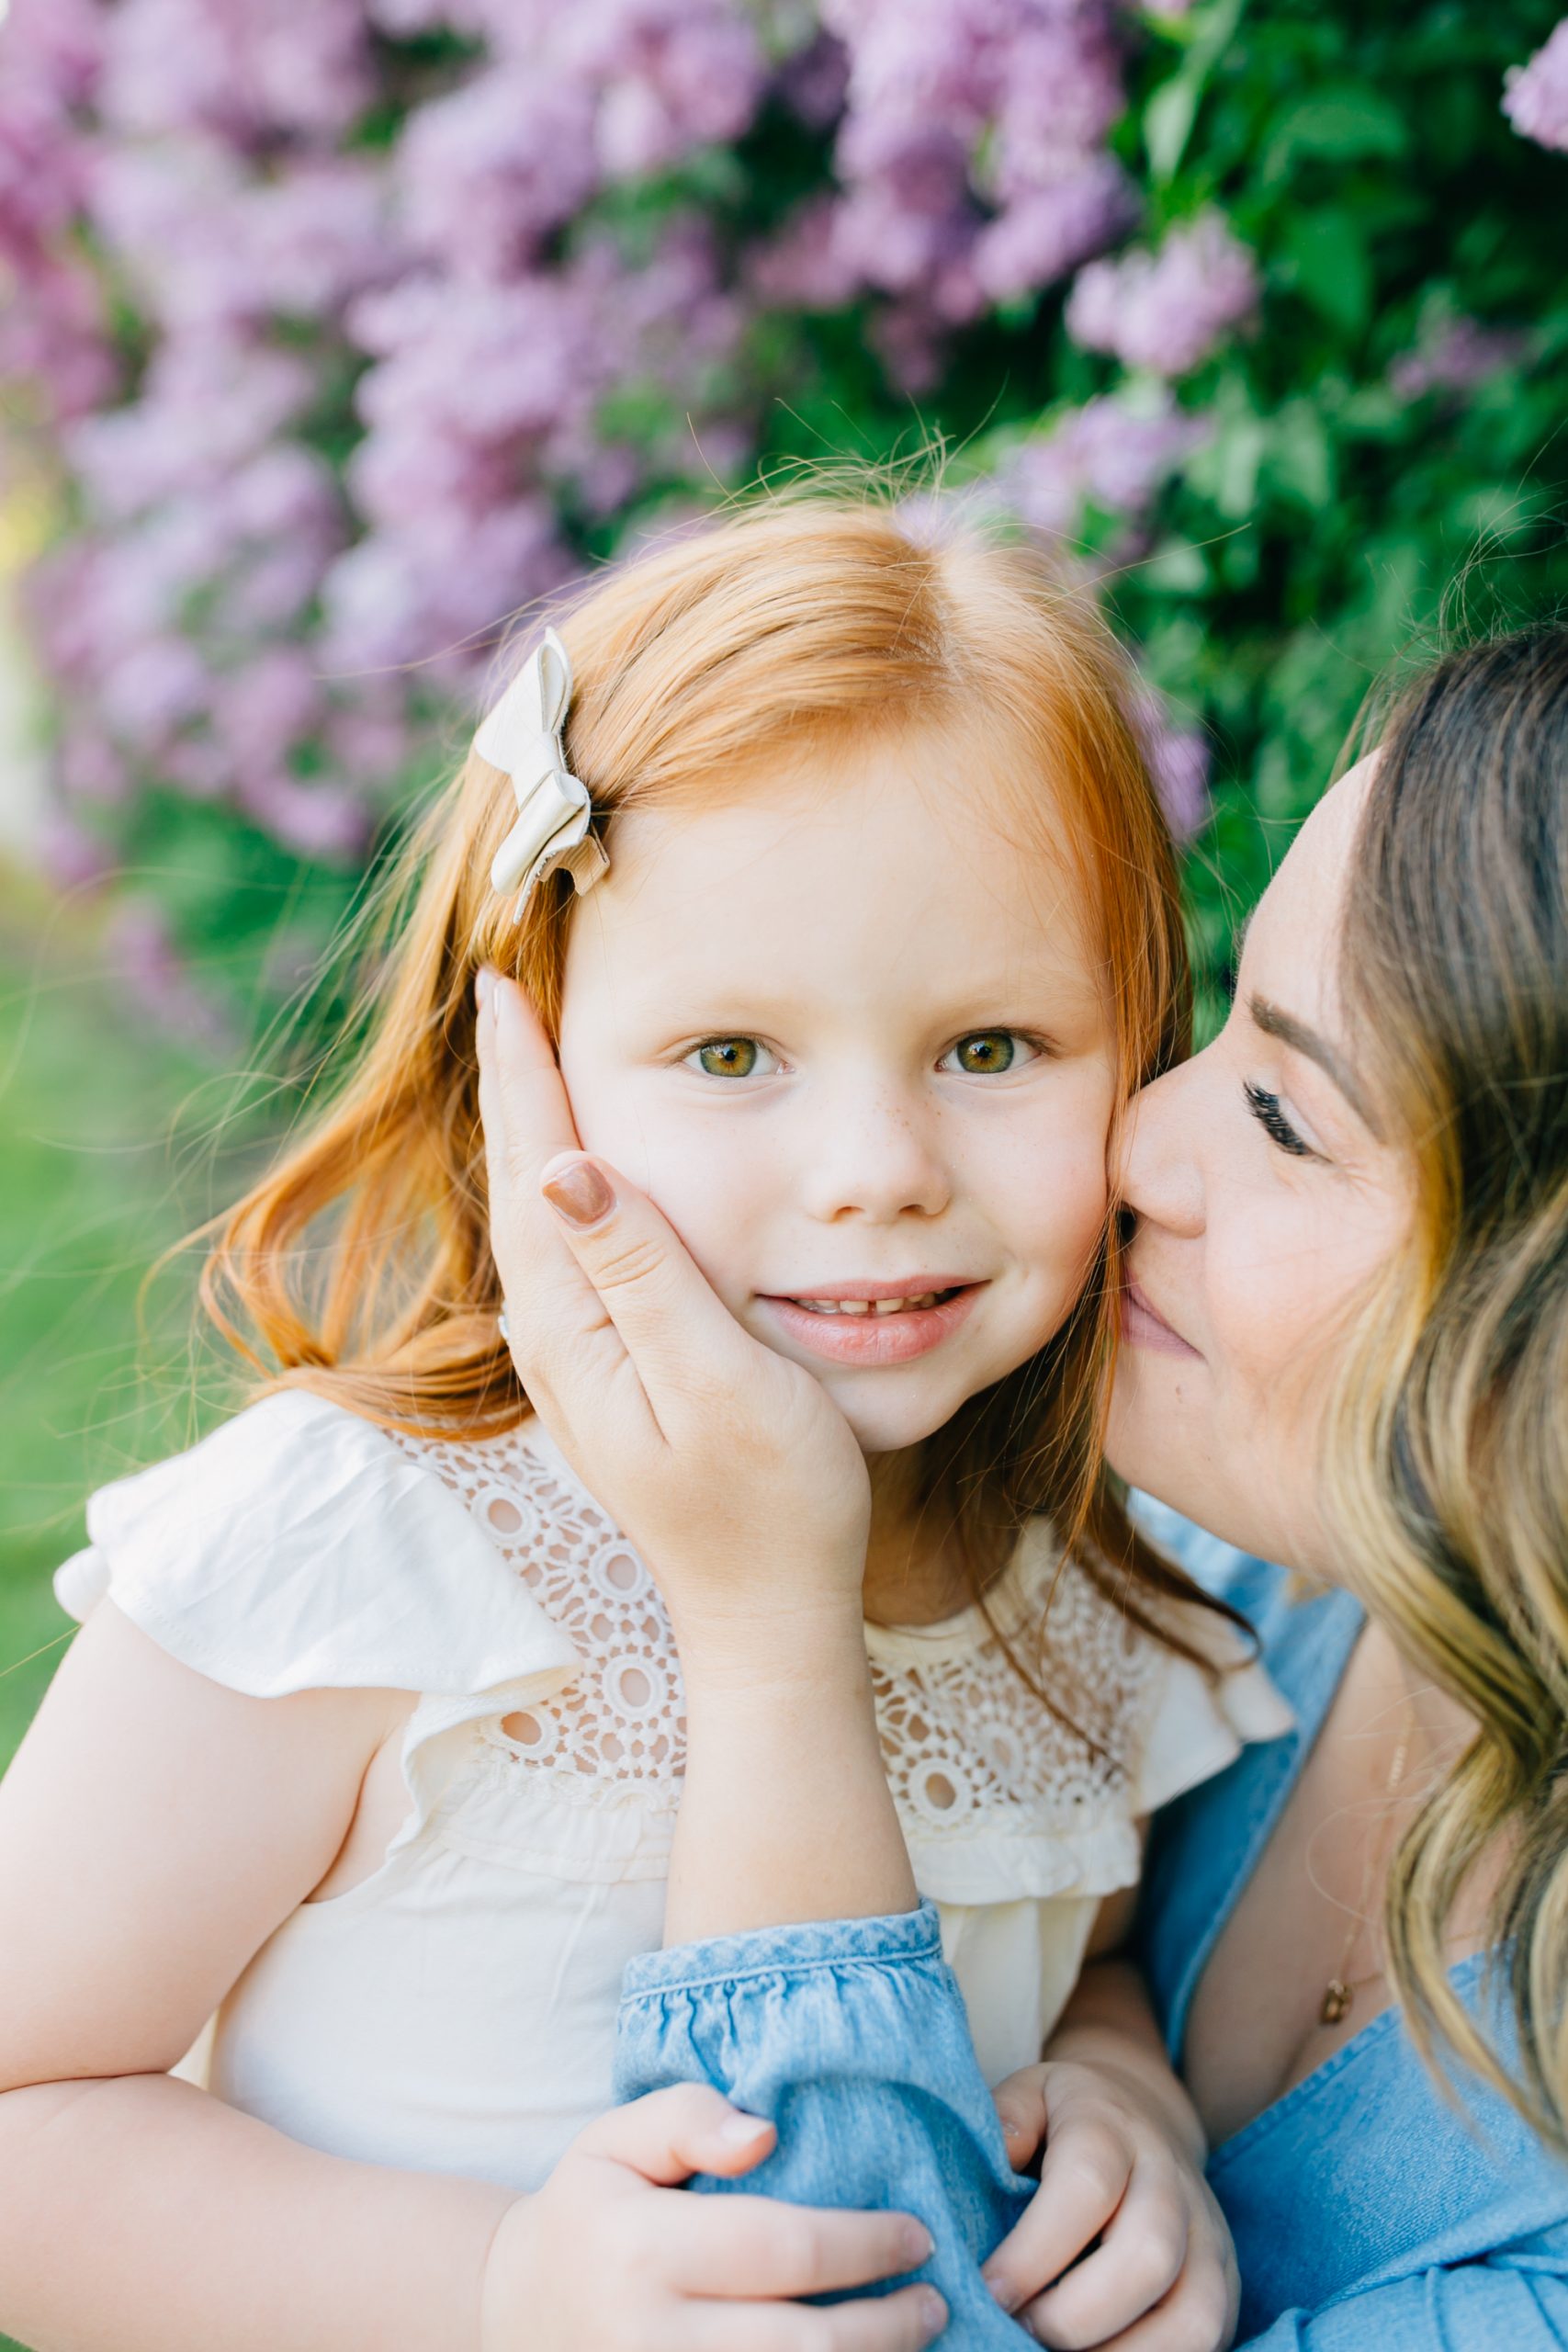 8 tips for the perfect family photos! - Mint Arrow